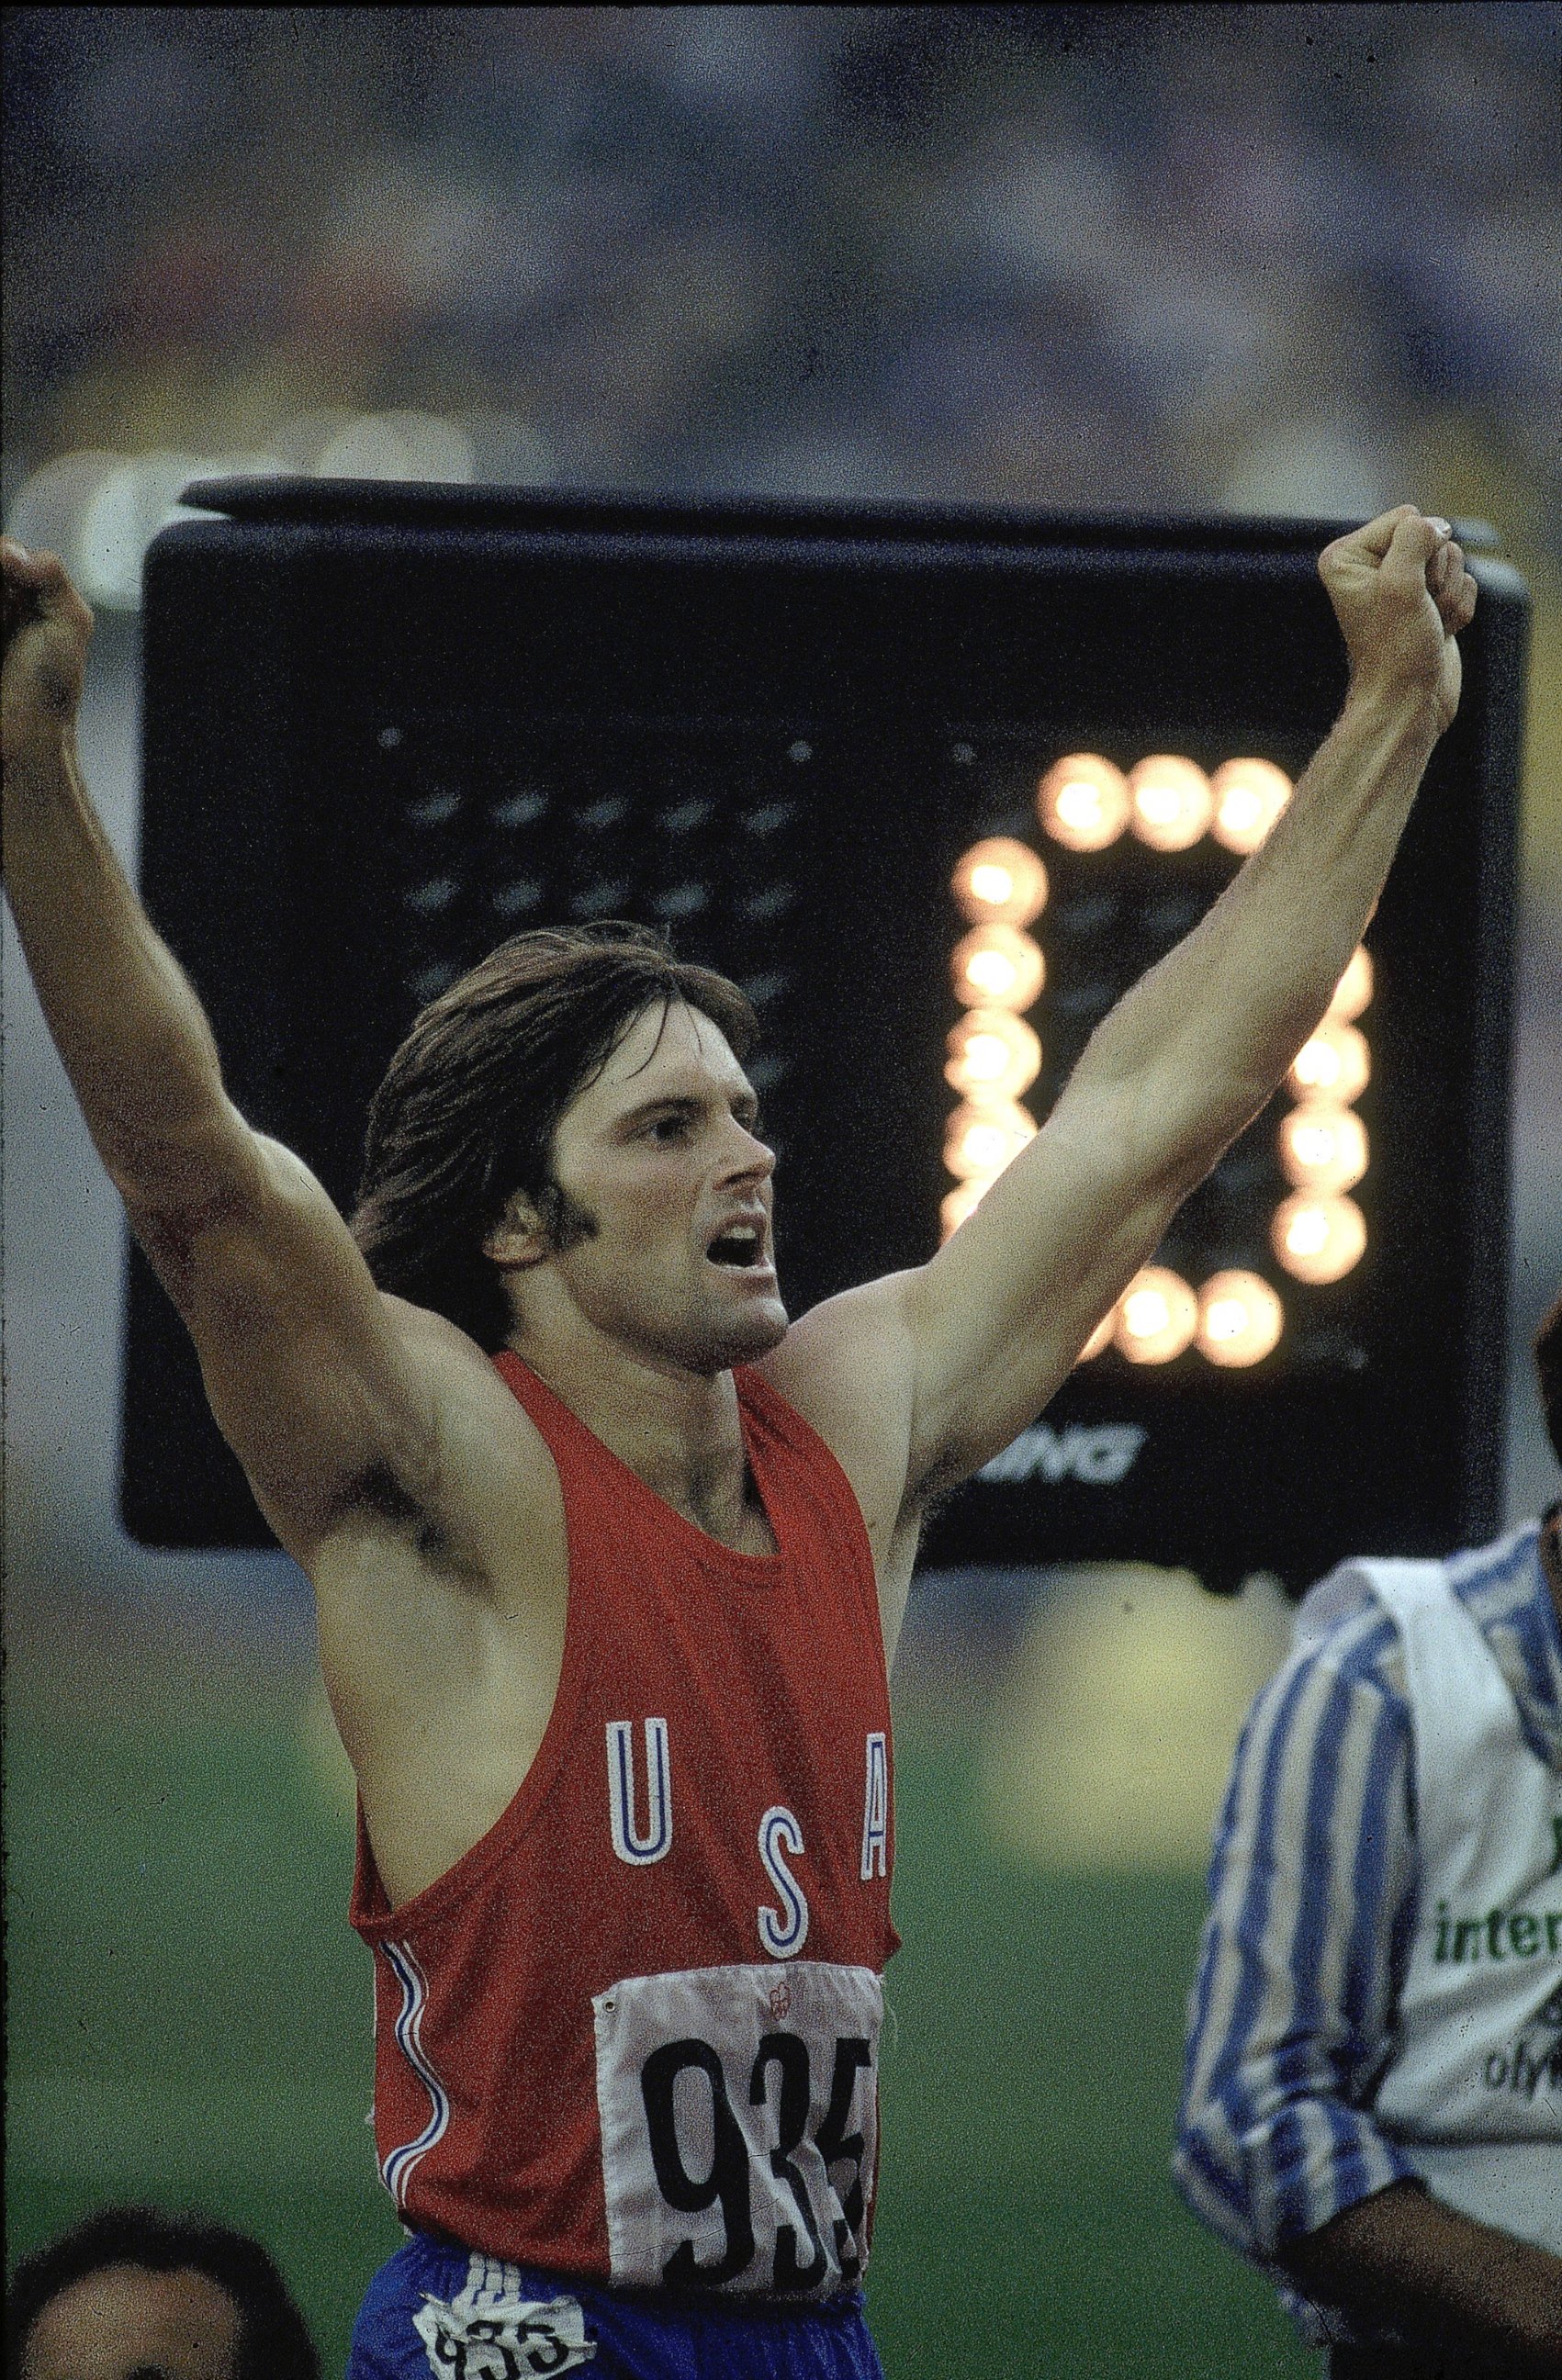 PHOTO: Bruce Jenner celebrates after winning 1500M race during Decathlon at Olympic Stadium in Montreal, Canada, July 17, 1976.